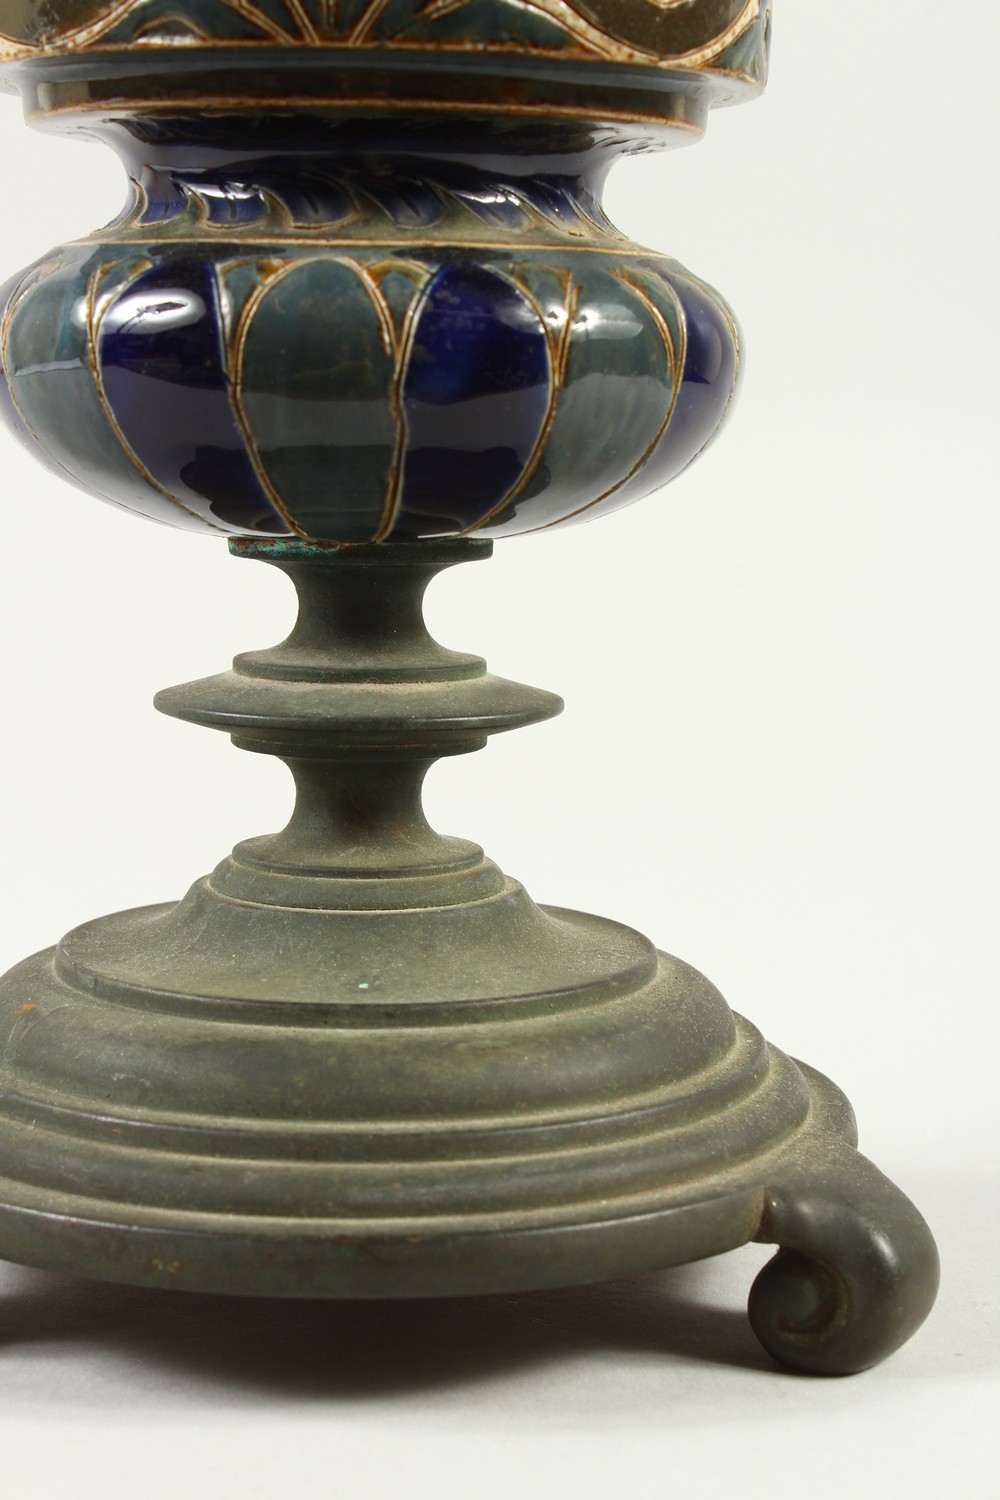 A DOULTON LAMBETH STONEWARE VASE, on a cast iron stand. 33cm high. - Image 3 of 8